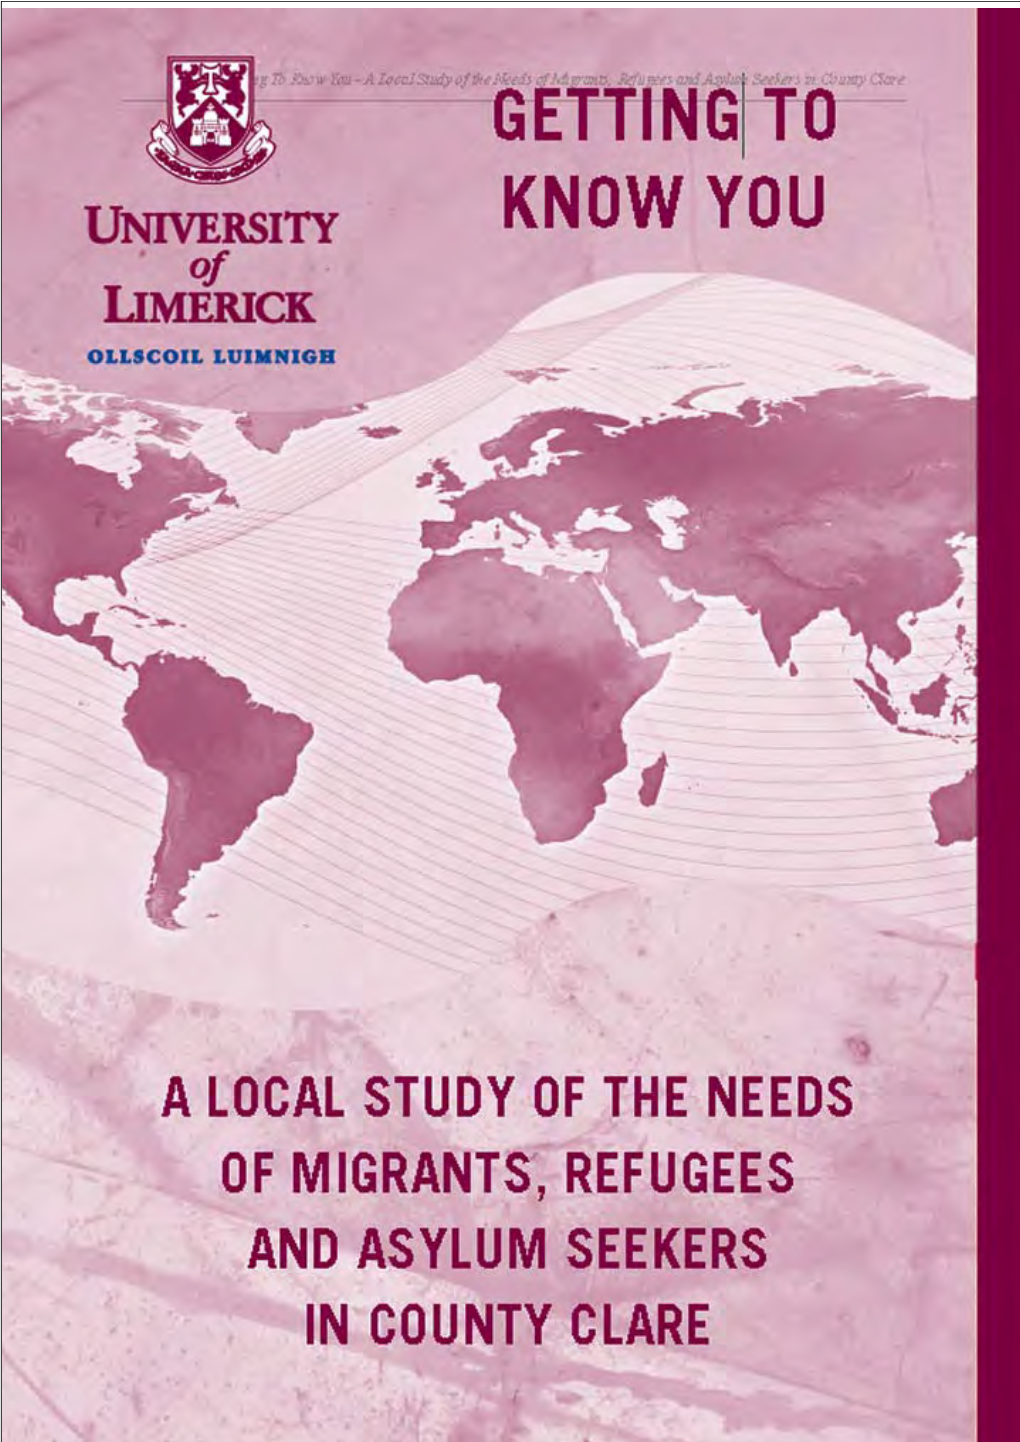 A Local Study of the Needs of Migrants, Refugees and Asylum Seekers